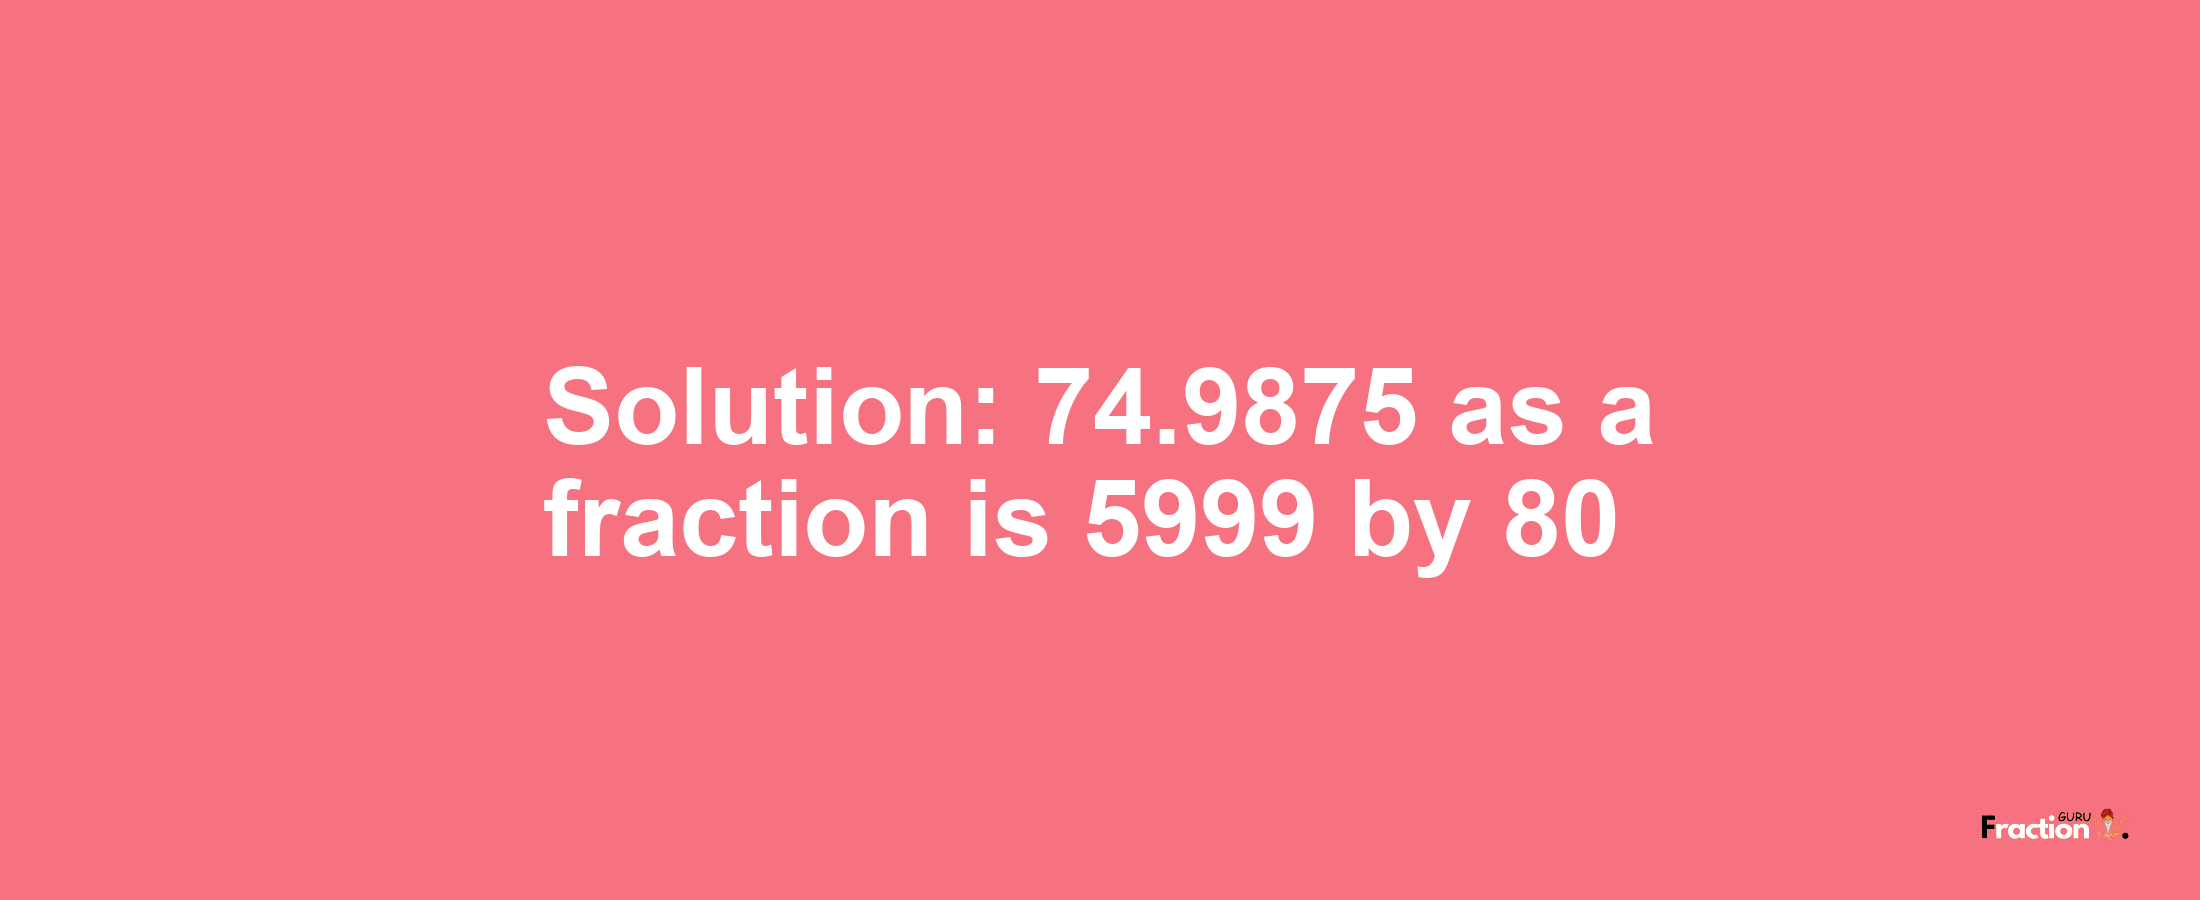 Solution:74.9875 as a fraction is 5999/80